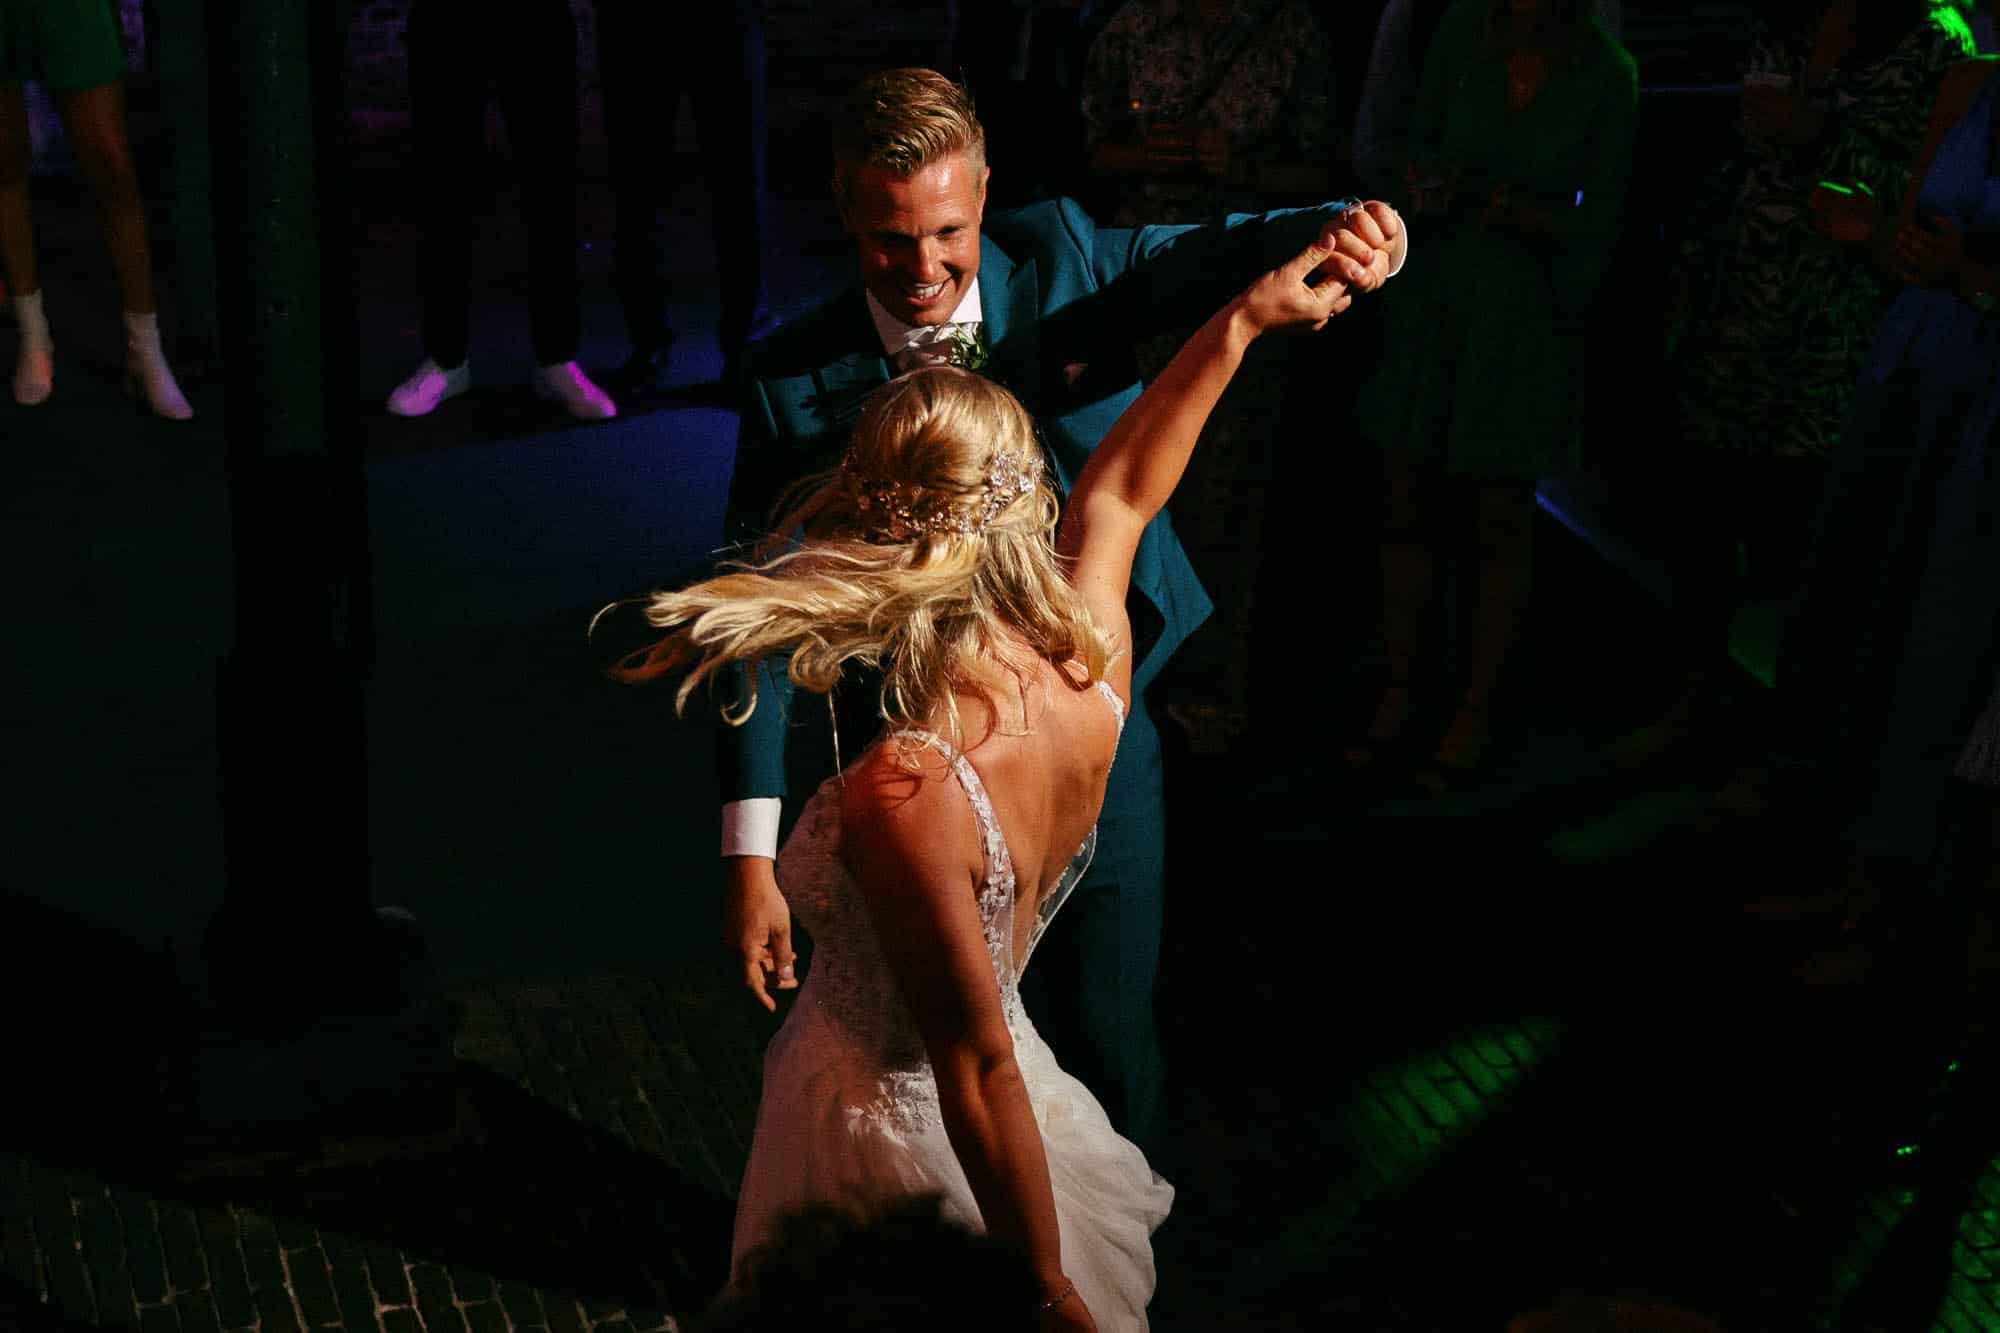 Dutch bride and groom dancing at a party.